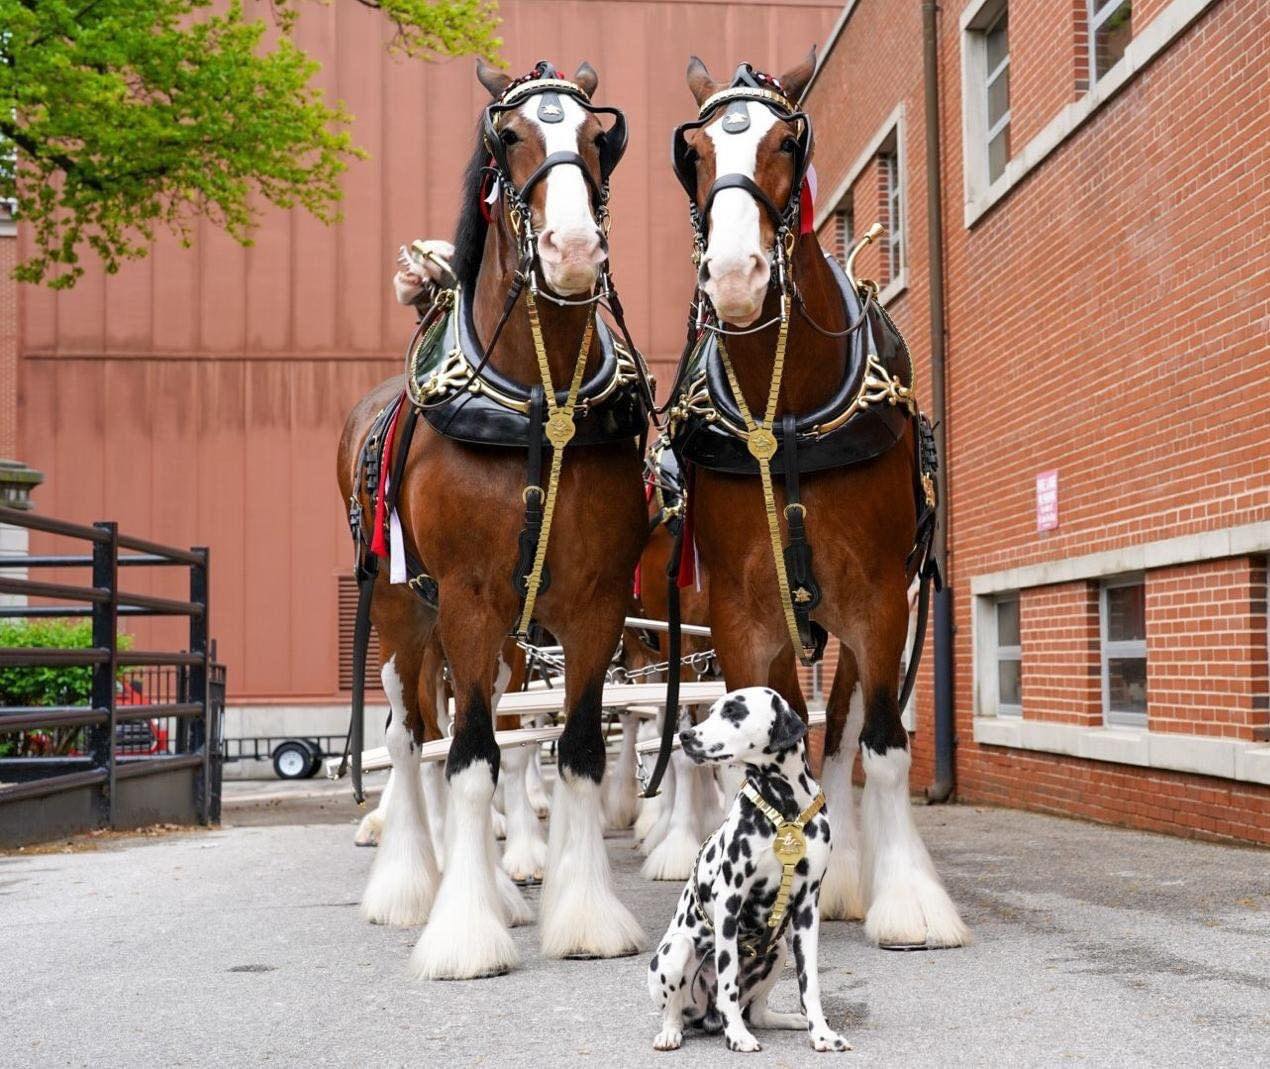 Budweiser Clydesdales to Visit AVENUE at White Marsh and Essex Day